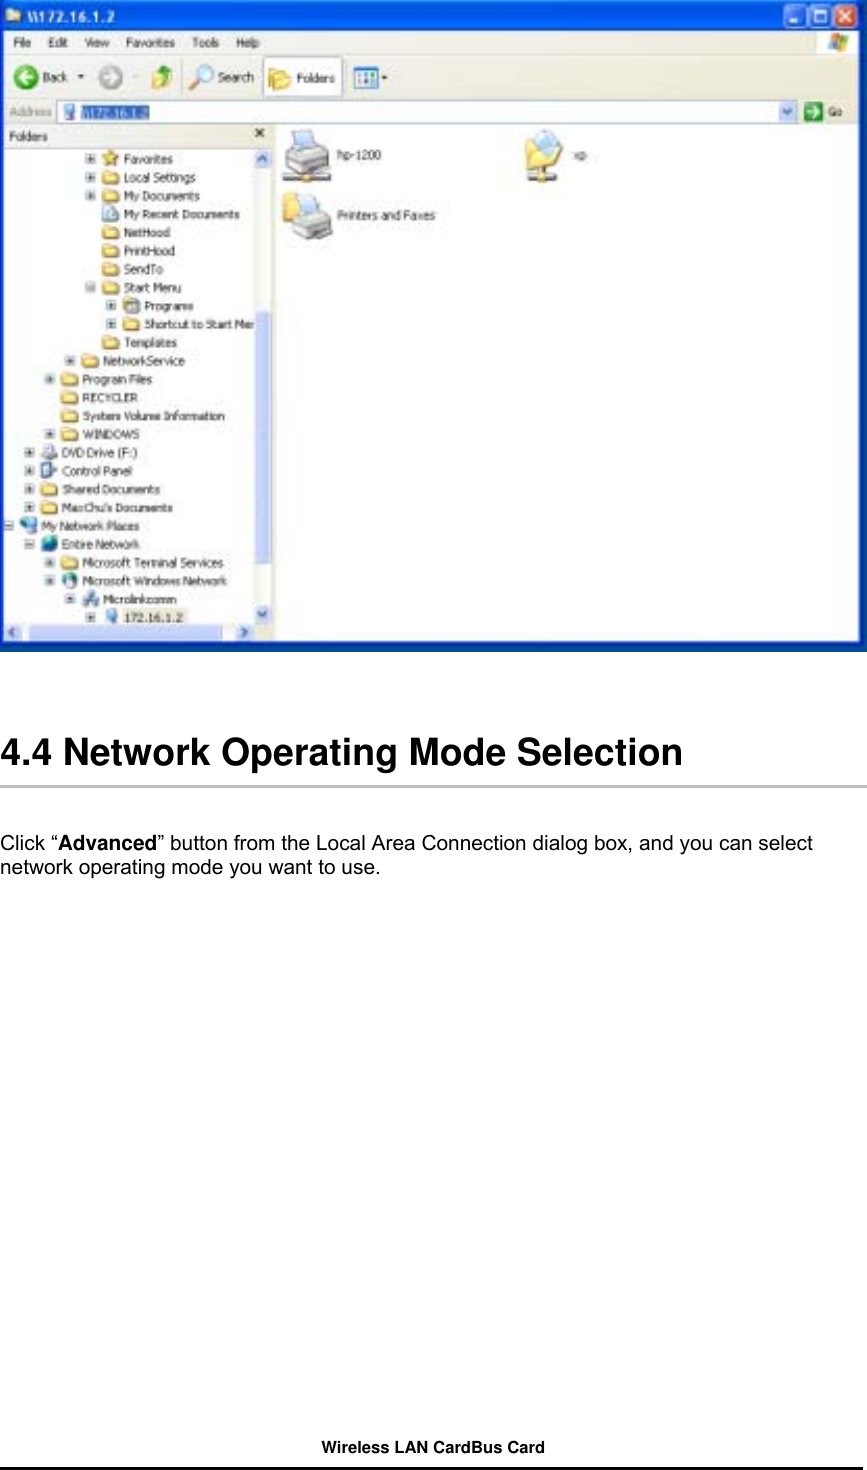   4.4 Network Operating Mode Selection   Click “Advanced” button from the Local Area Connection dialog box, and you can select network operating mode you want to use.   Wireless LAN CardBus Card 